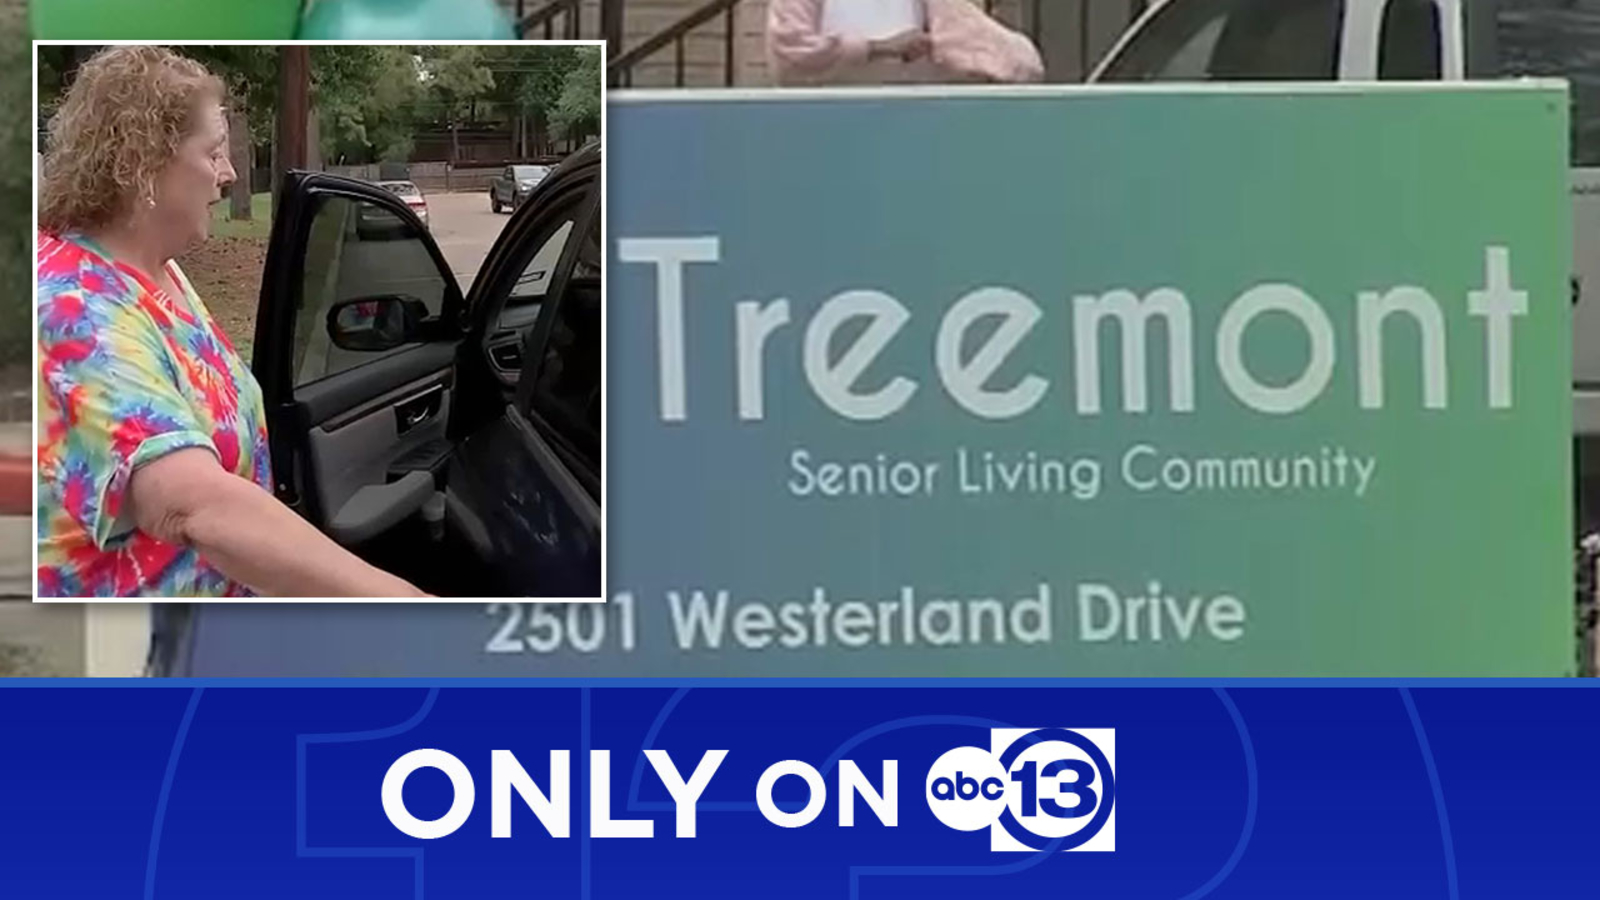 Only On 13: Woman was kidnapped and robbed at Treemont Senior Living Center 1 year before 74-year-old was found murdered [Video]